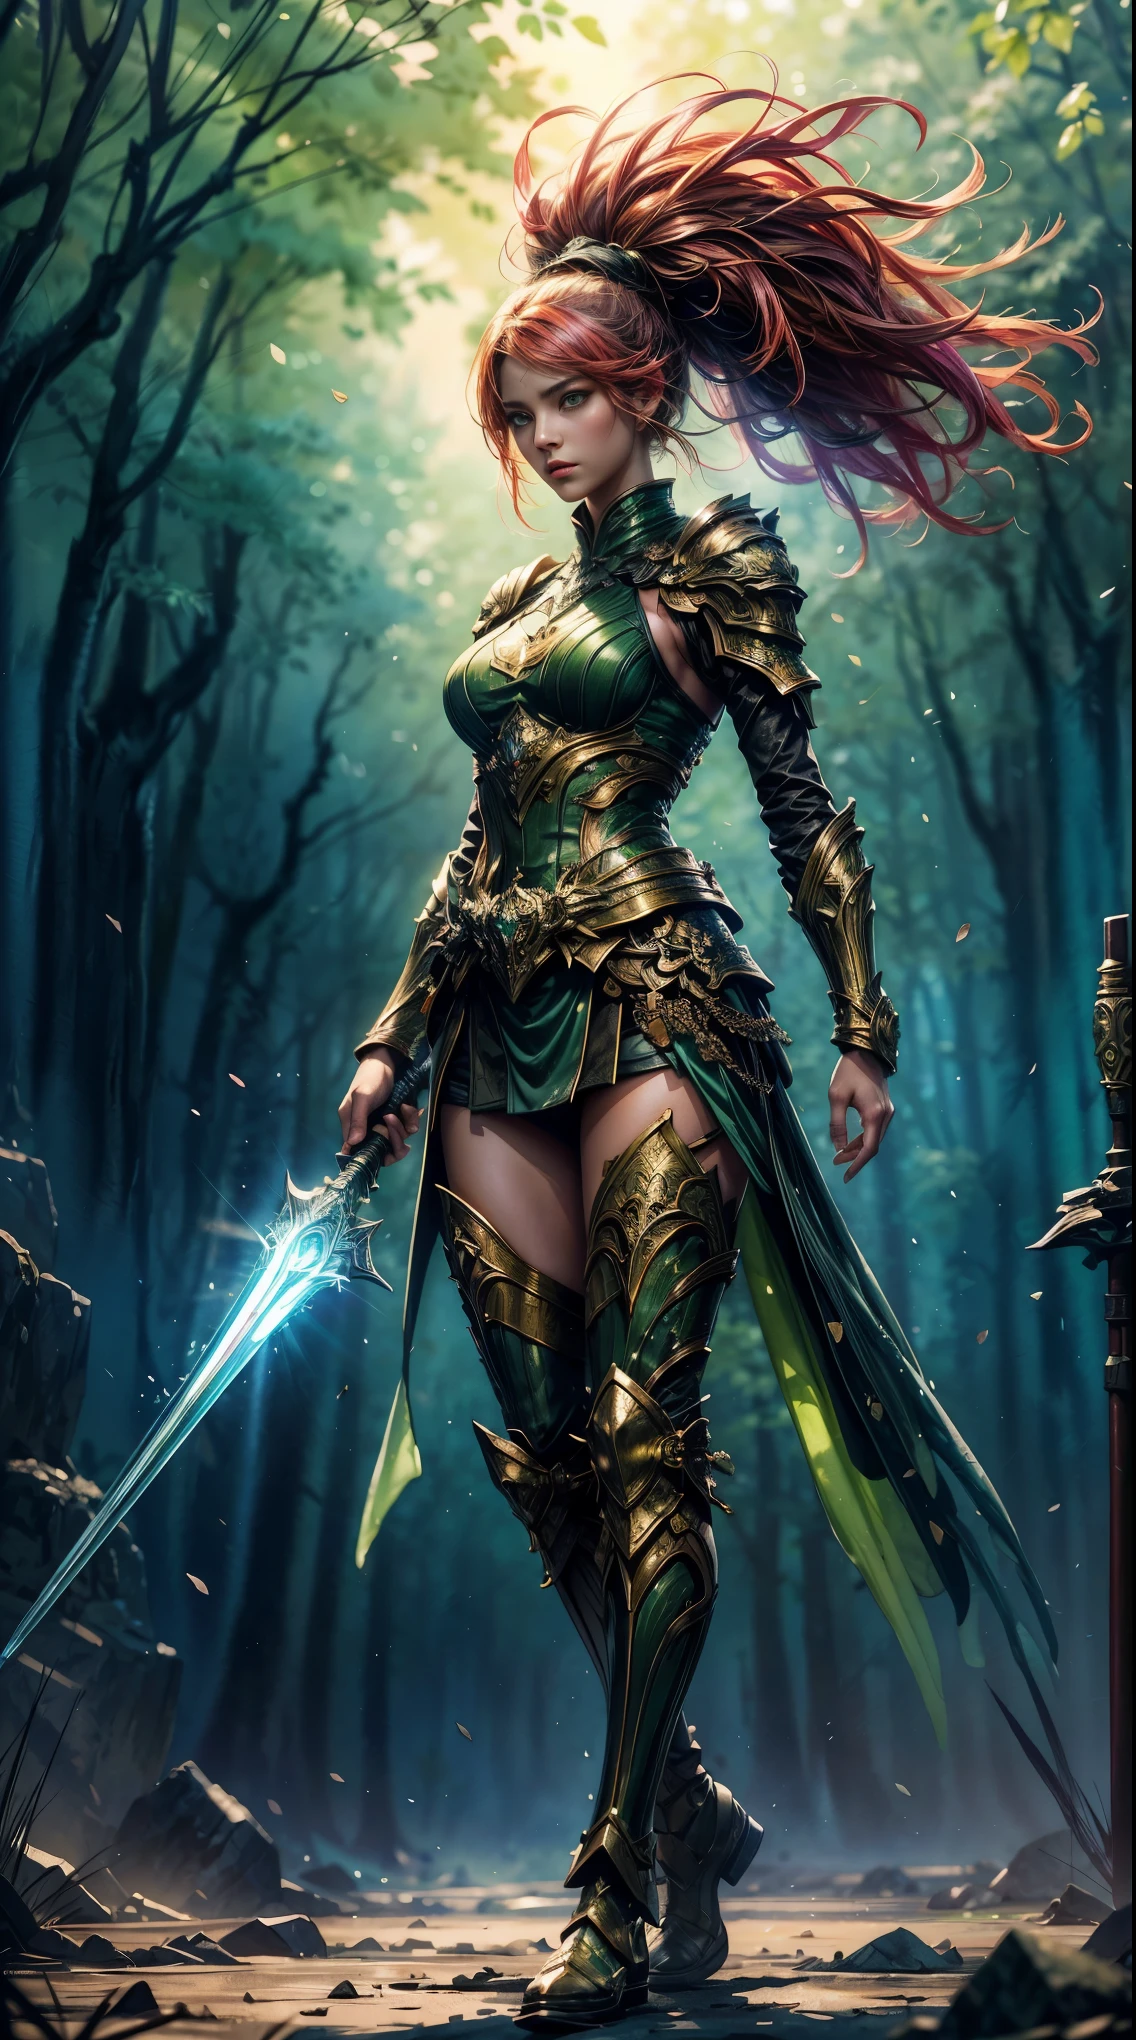 a full body picture of figures，Depicts a fantasy female warrior in a holding a staff。bright green eyes, standing in an imposing pose looking at the viewer，The expression is threatening。full battle outfit in shades of green。Soft, warm lighting highlights her thoughtful gaze。Create using：digital strokes、Reflect emotions、fantastic dream scene、Detailed character research、ambient color、chaotic atmosphere、glibatree tips、HD quality、Natural look。Focus on showing the power and of female warrior, (watercolor painting:1.5)，(Super high saturation, bright and vivid colors:1.5), (nsfw), (Look at the audience head-on:1.5)